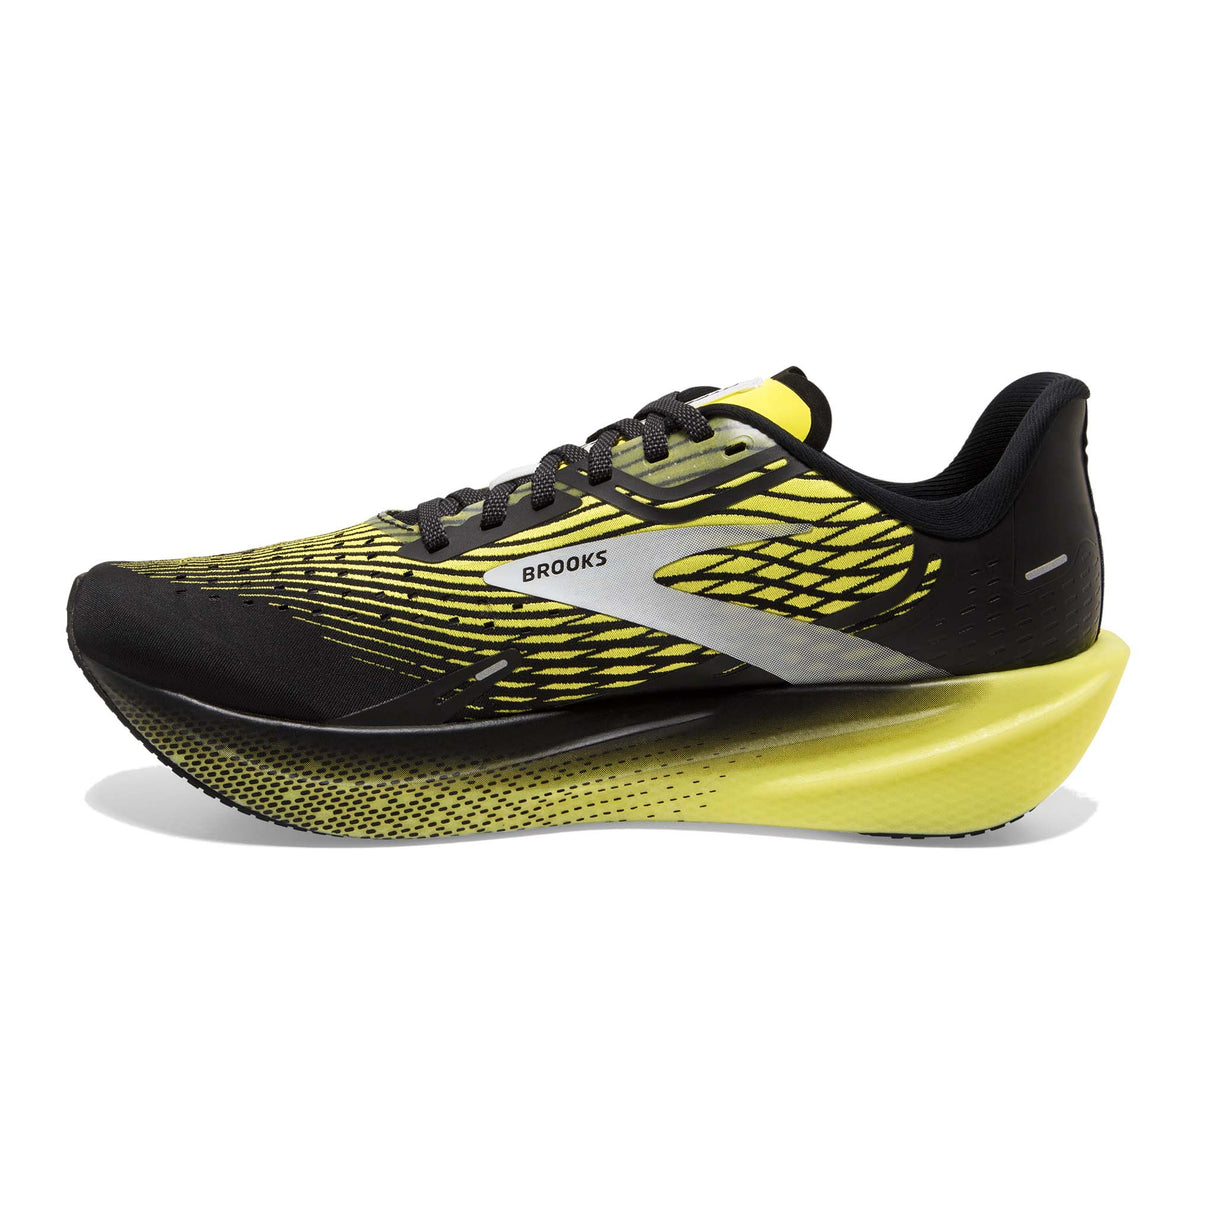 Brooks Hyperion Max souliers de course homme - Black / Blazing Yellow / White - lateral